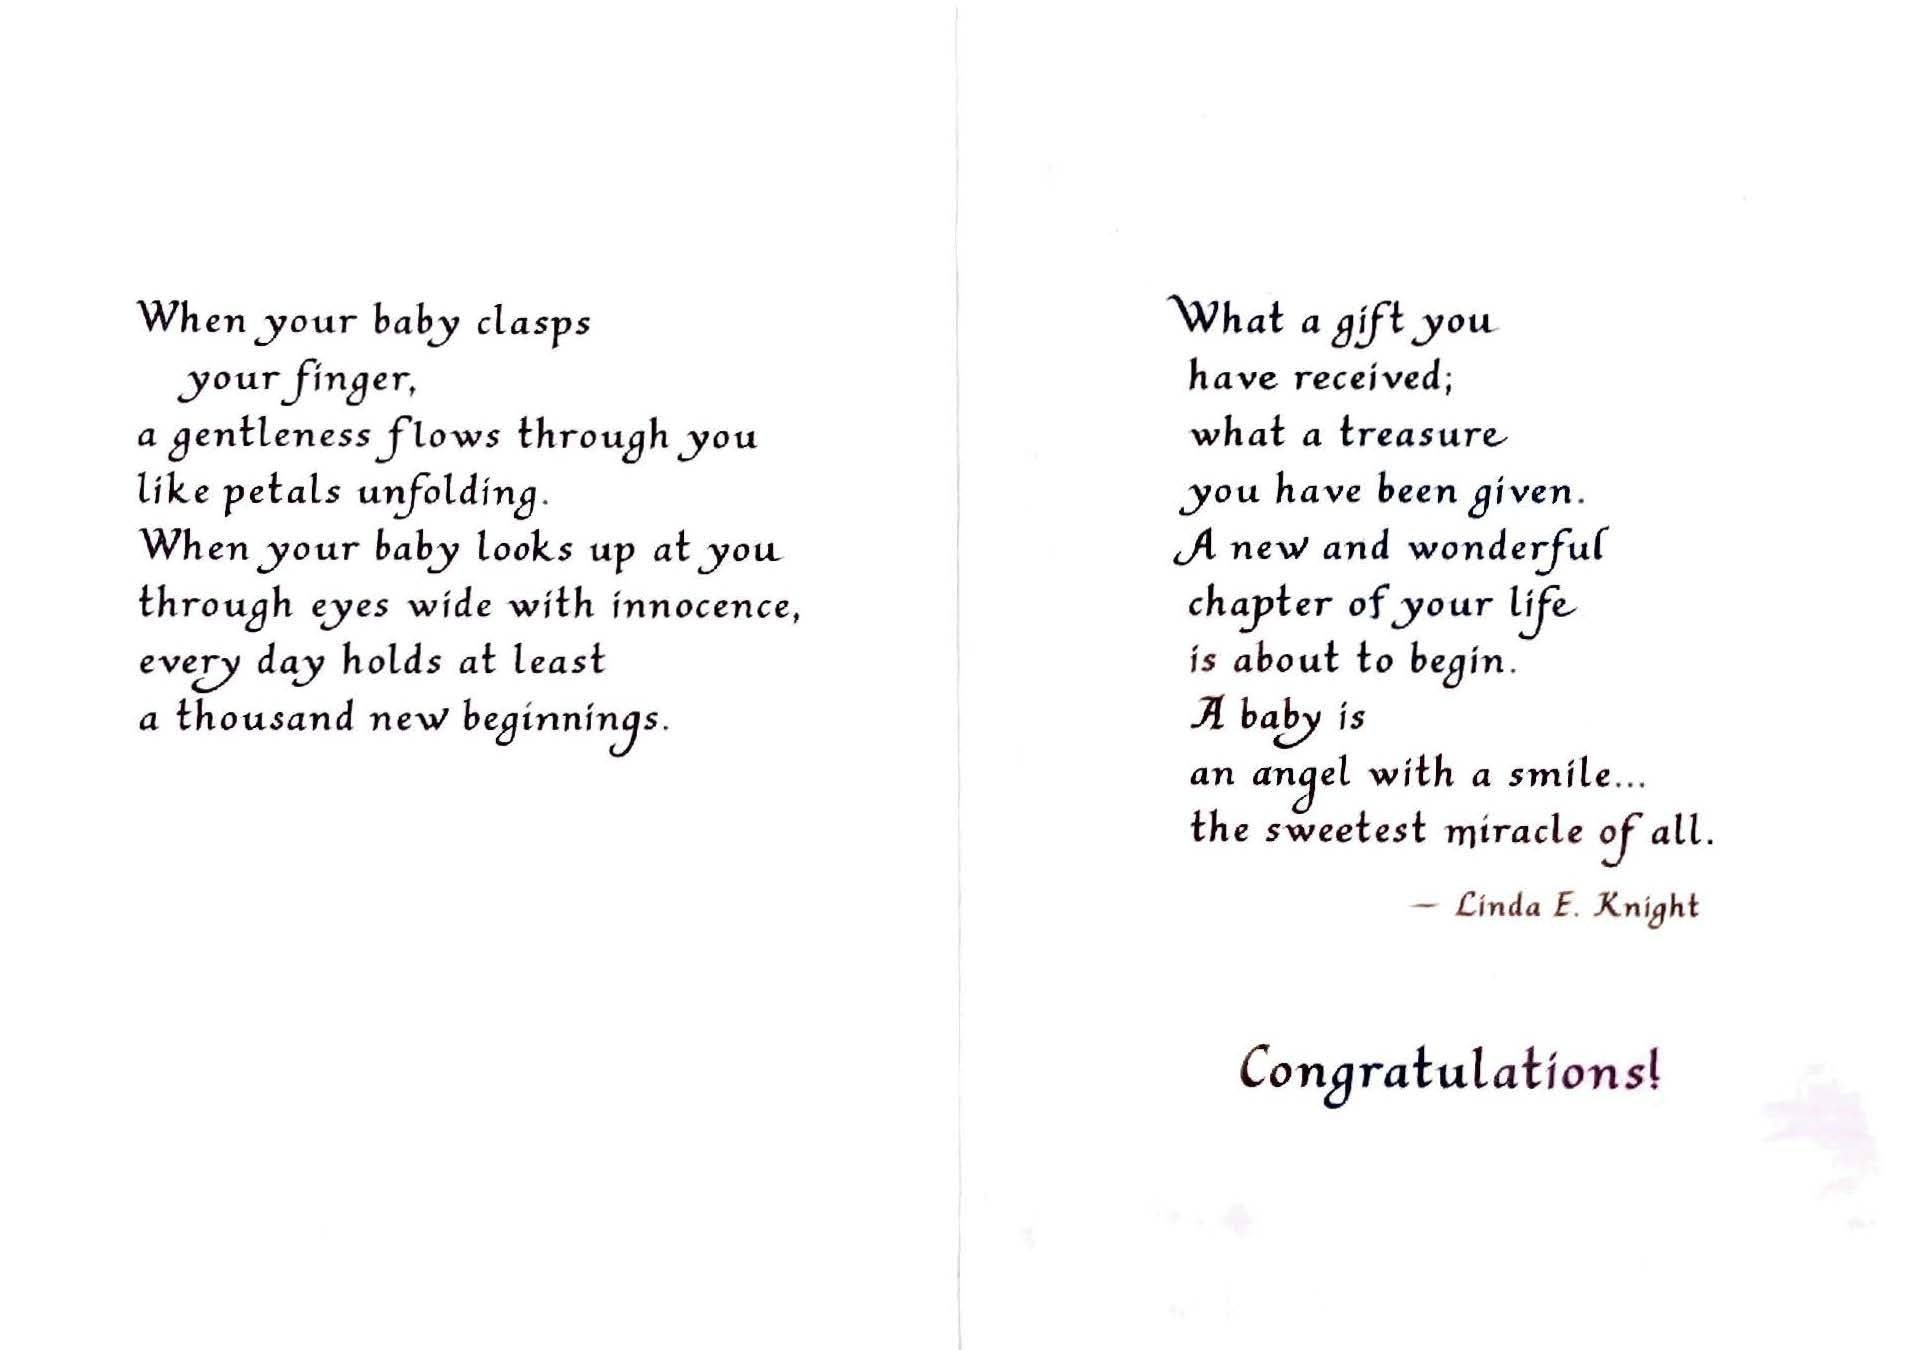 New Baby Card - A Baby Is The Sweetest Miracle - Blue Mountain Arts card